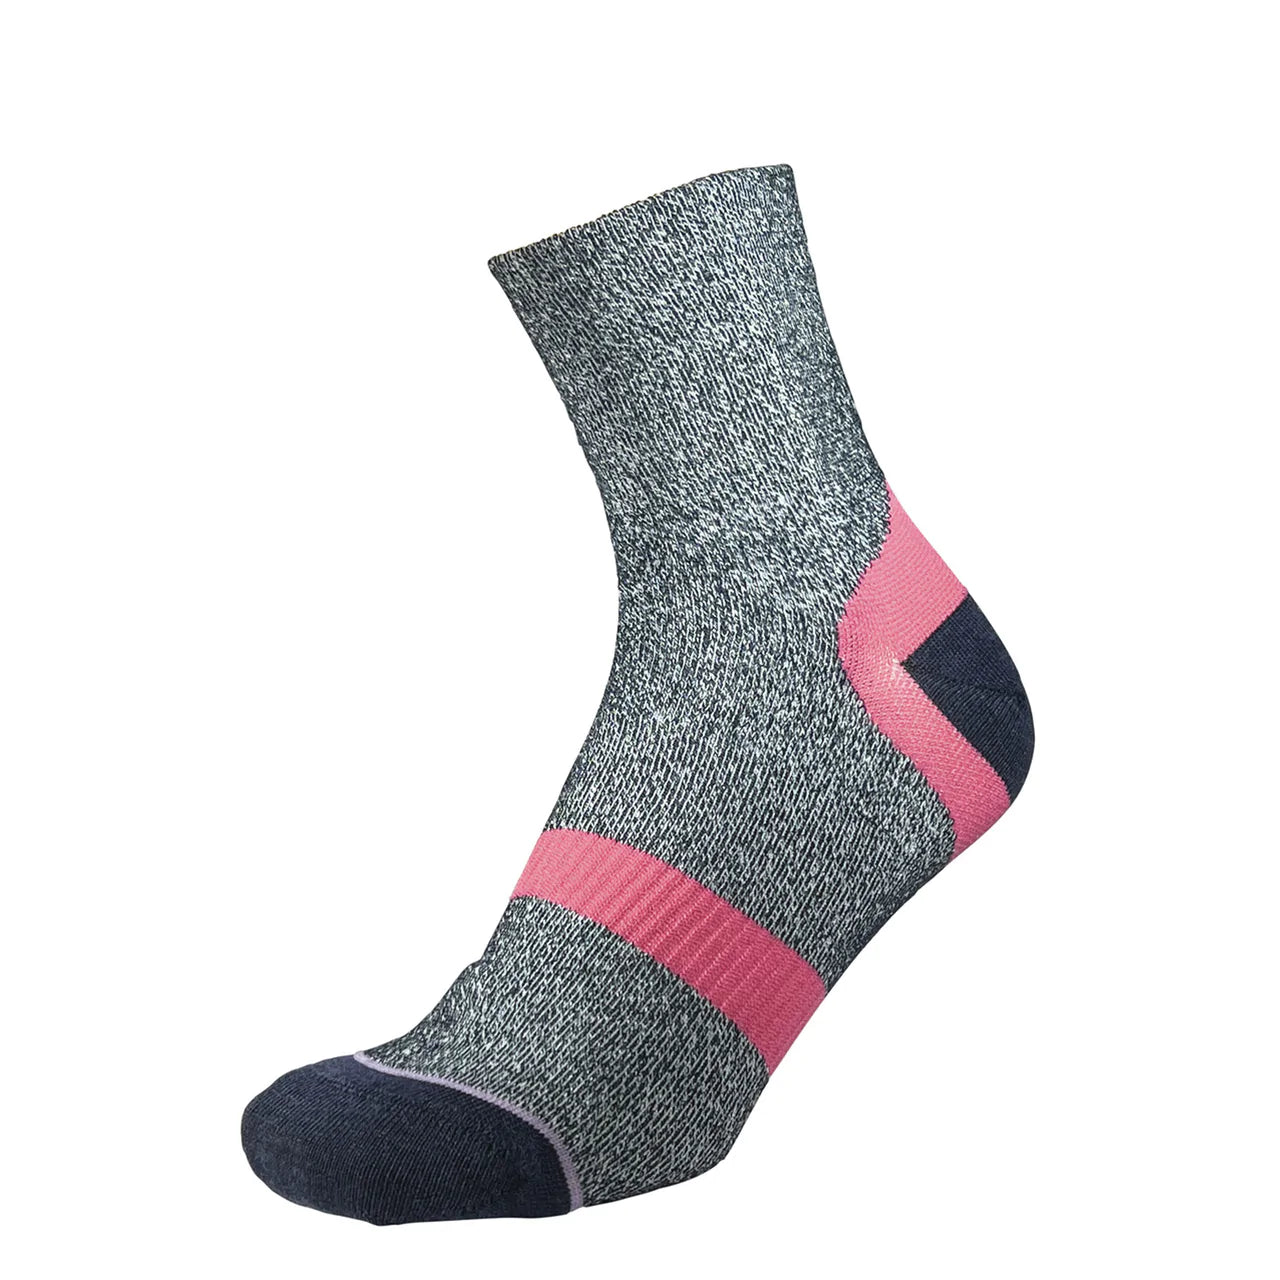 Women's Approach Repreve Double Layer Sock - 1999